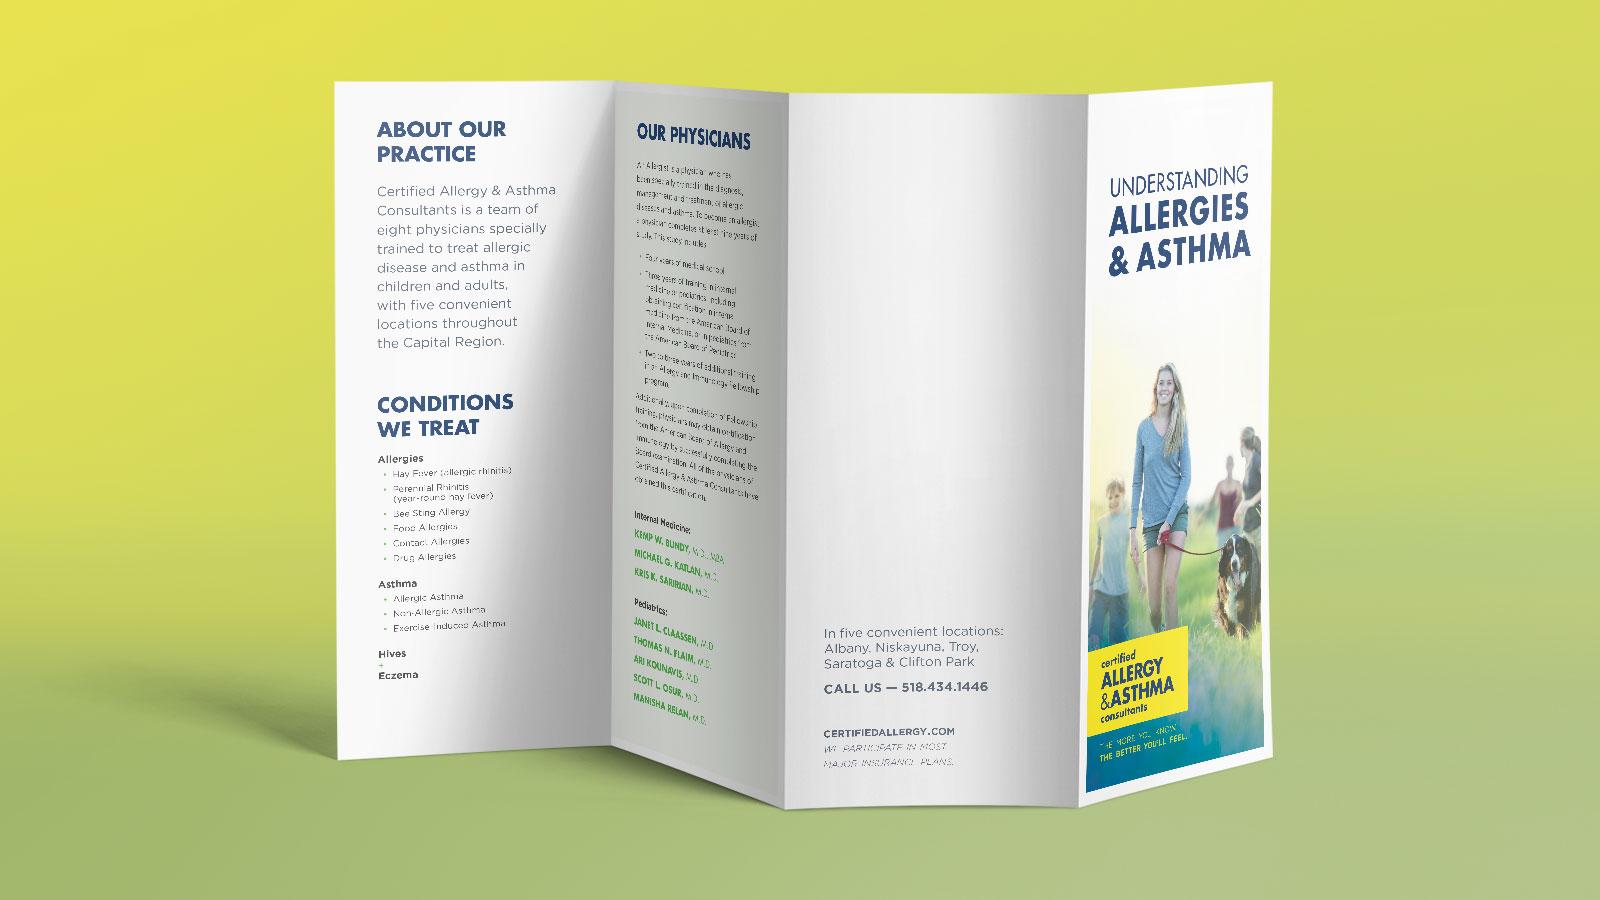 Certified Allergy & Asthma Consultants | Understanding Allergies And Asthma quad-fold brochure